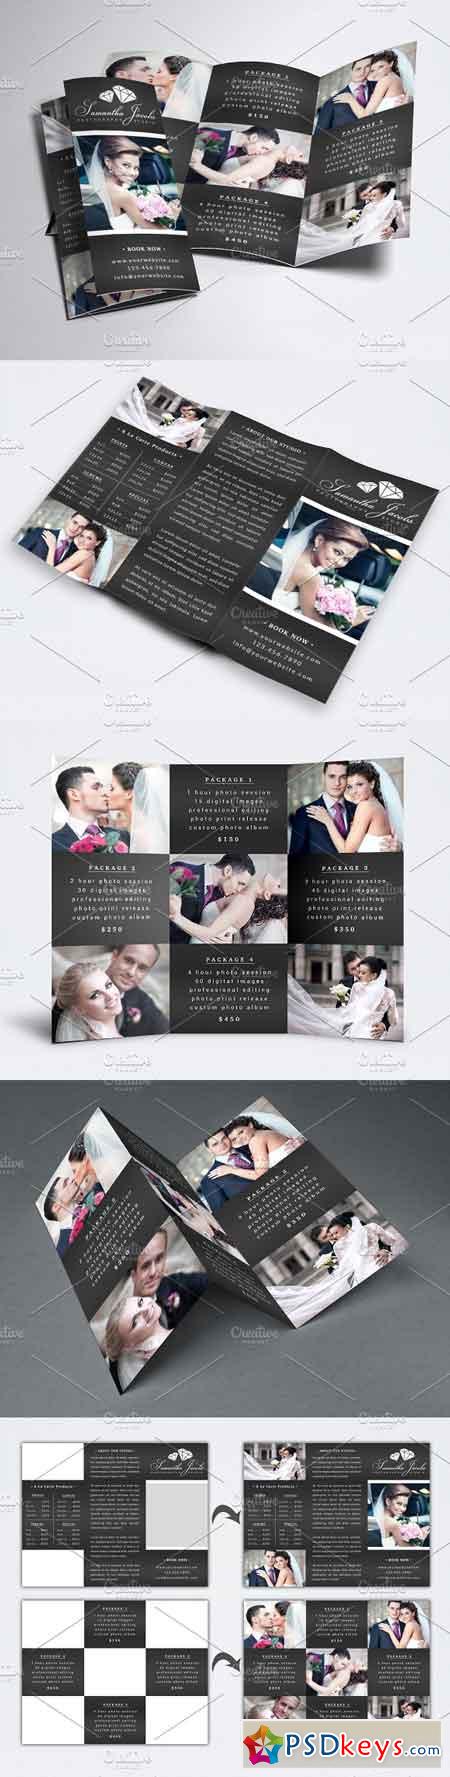 Photography Trifold Brochure Templat 1160787